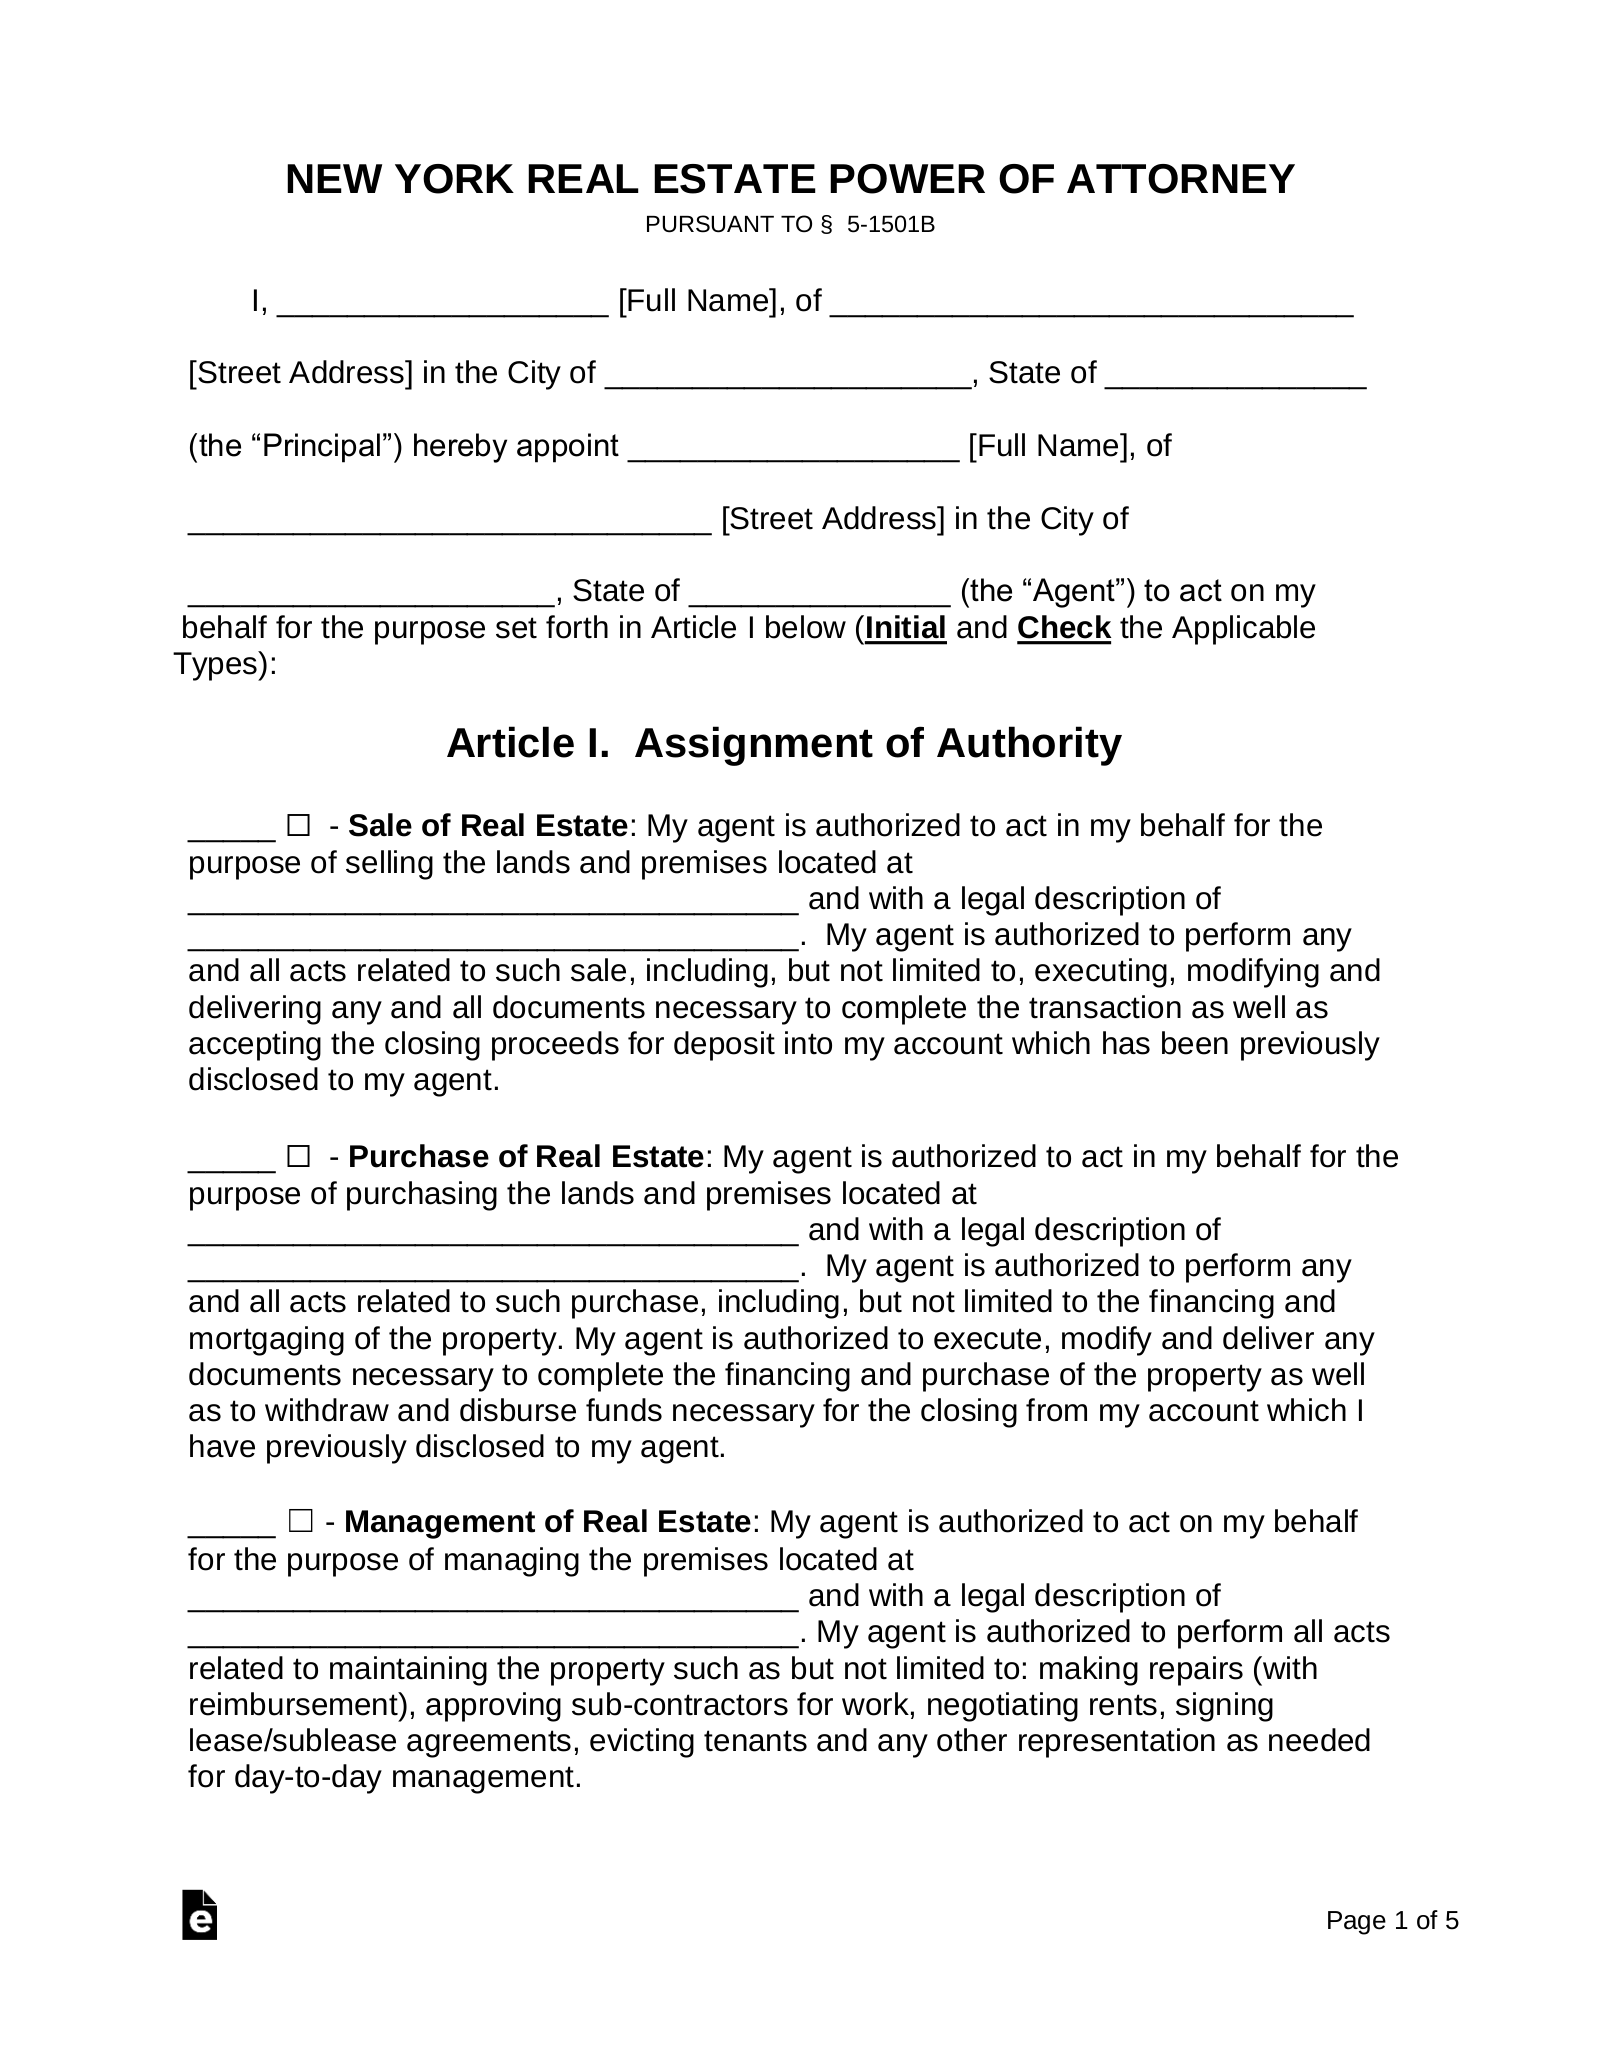 Free New York Real Estate Power of Attorney Form